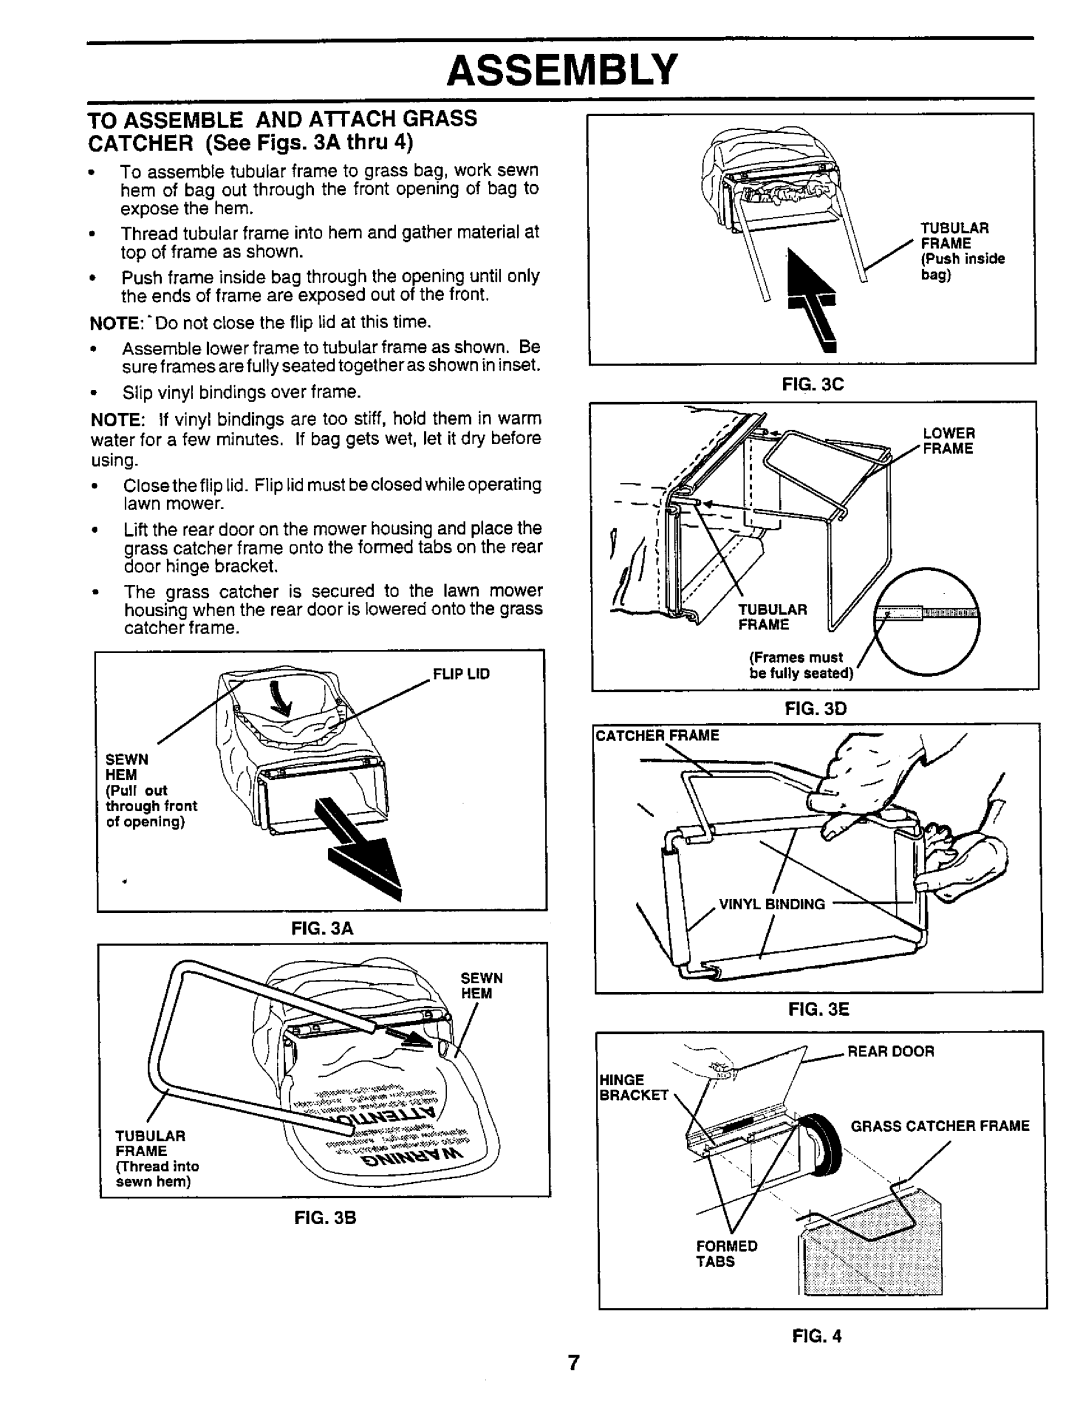 Sears 917.373981 owner manual Assembly, TO ASSEMBLE AND AIrACH GRASS, CATCHER See Figs. 3A thru, D Catcherframe 